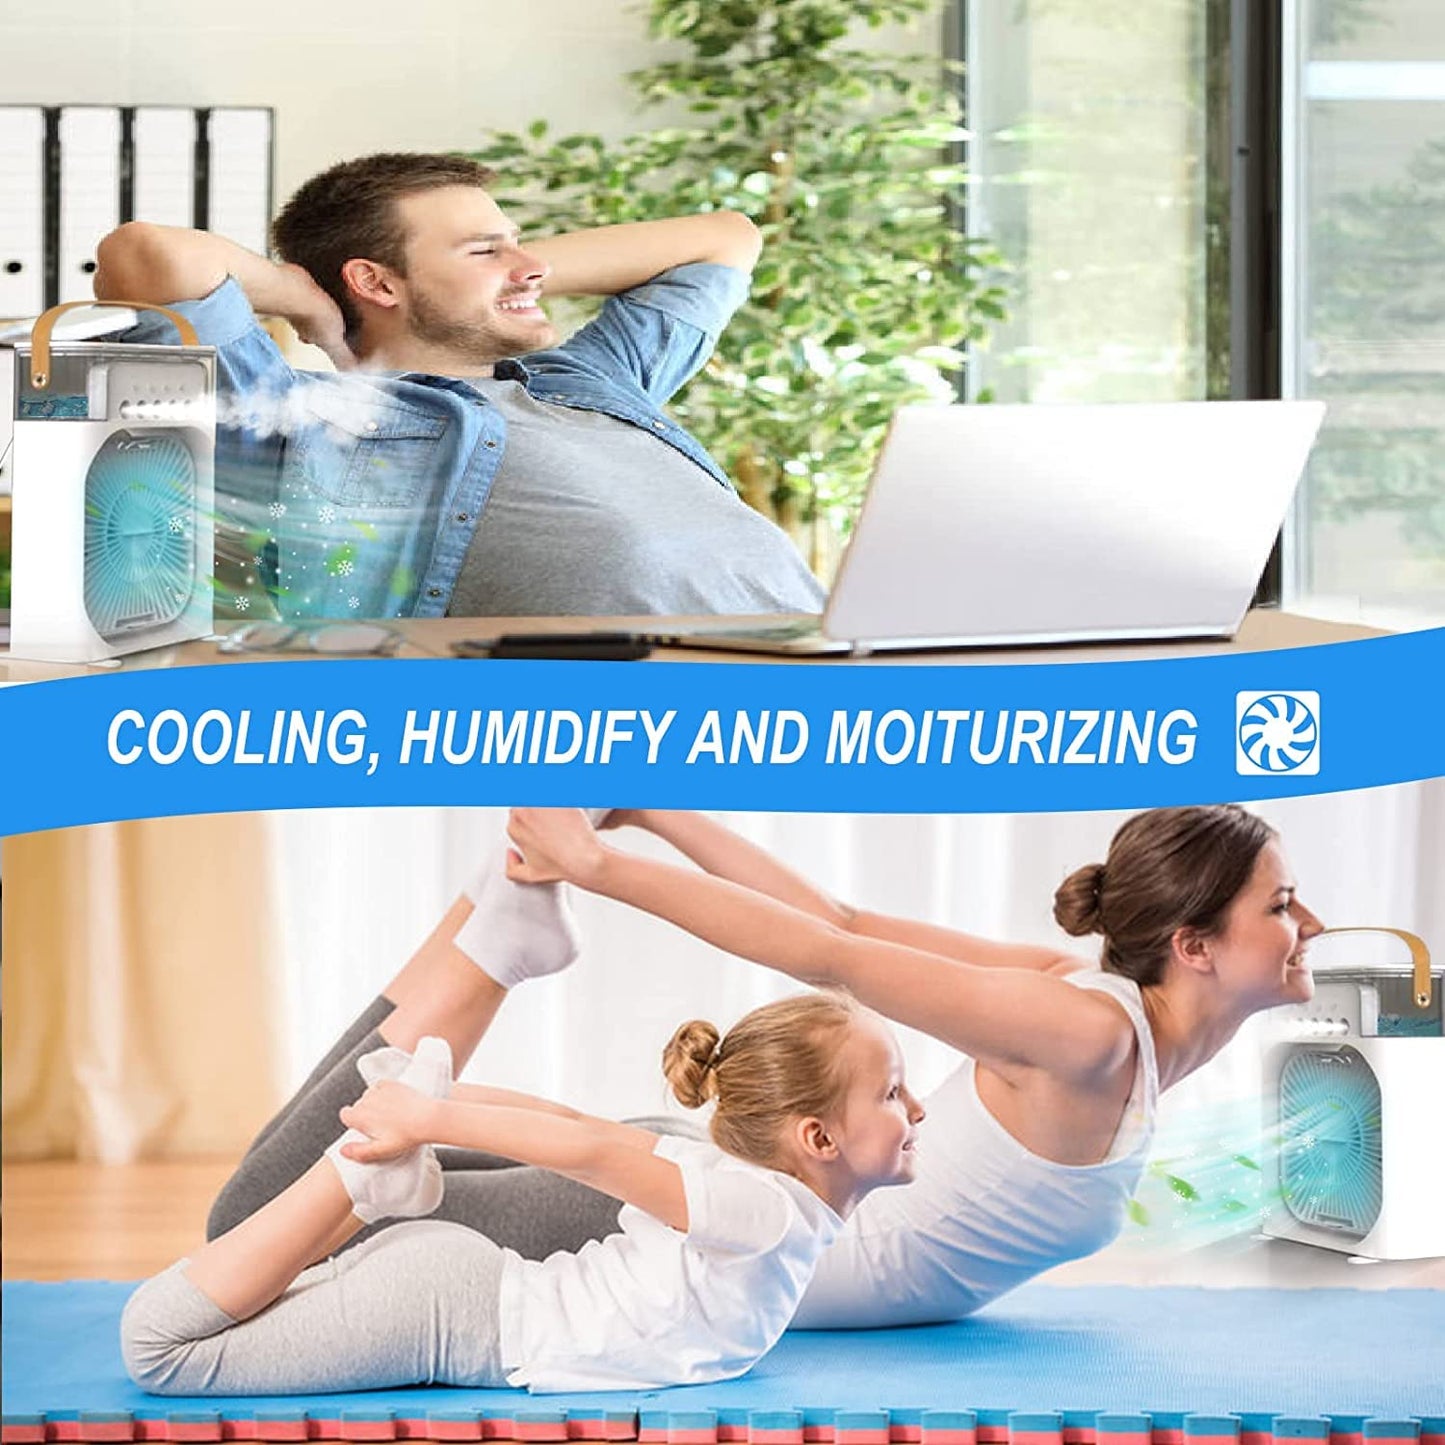 Portable Humidifier Air Cooler Fan Mini Cooler For Home With 3 Speed Mode, Mist Fan With Water Spray, 7 Color Led And Timer, Usb Personal Cooler Desk Fan(Usb Powered Mini Ac, Multicolor)